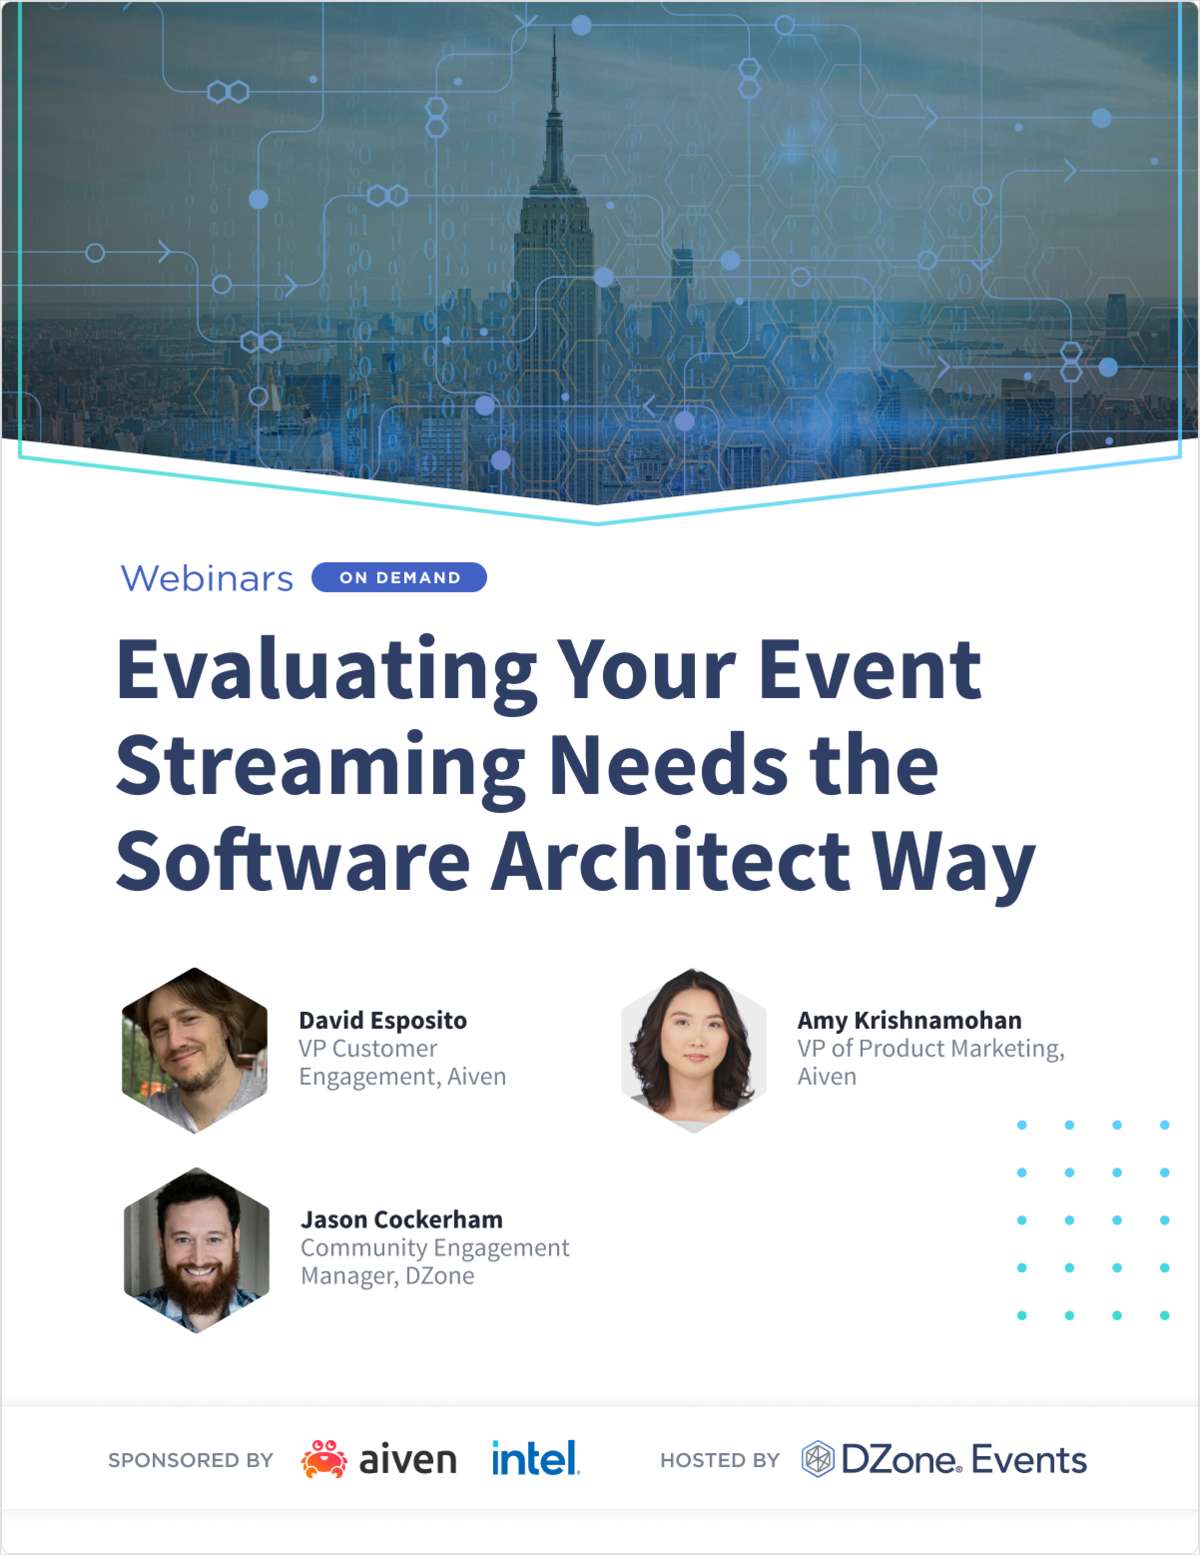 Evaluating Your Event Streaming Needs the Software Architect Way